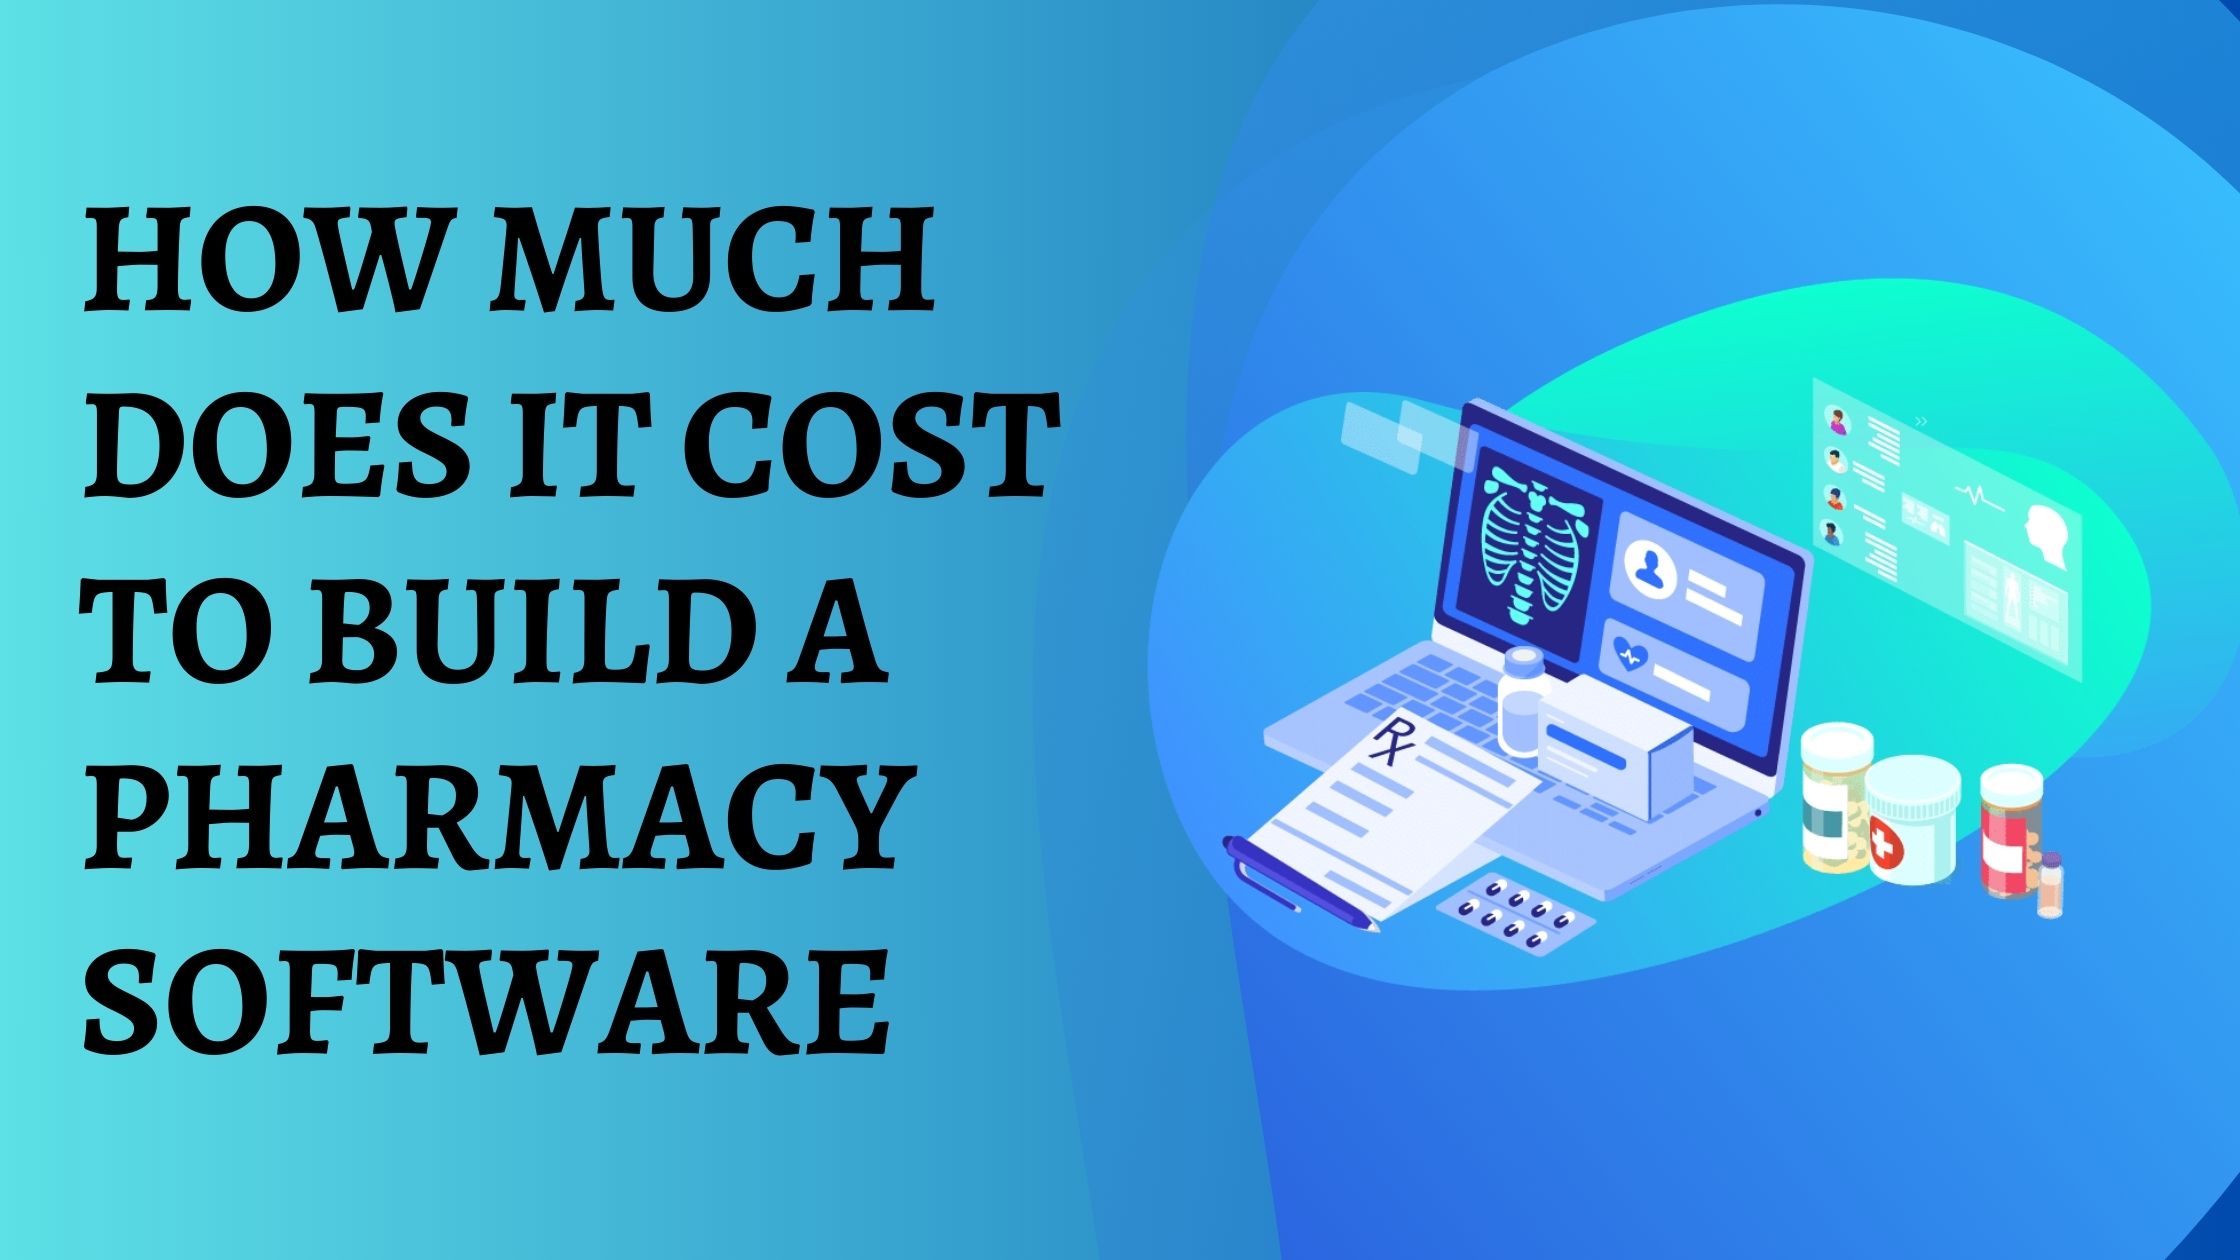 How Much Does It Cost To Build A Pharmacy Software